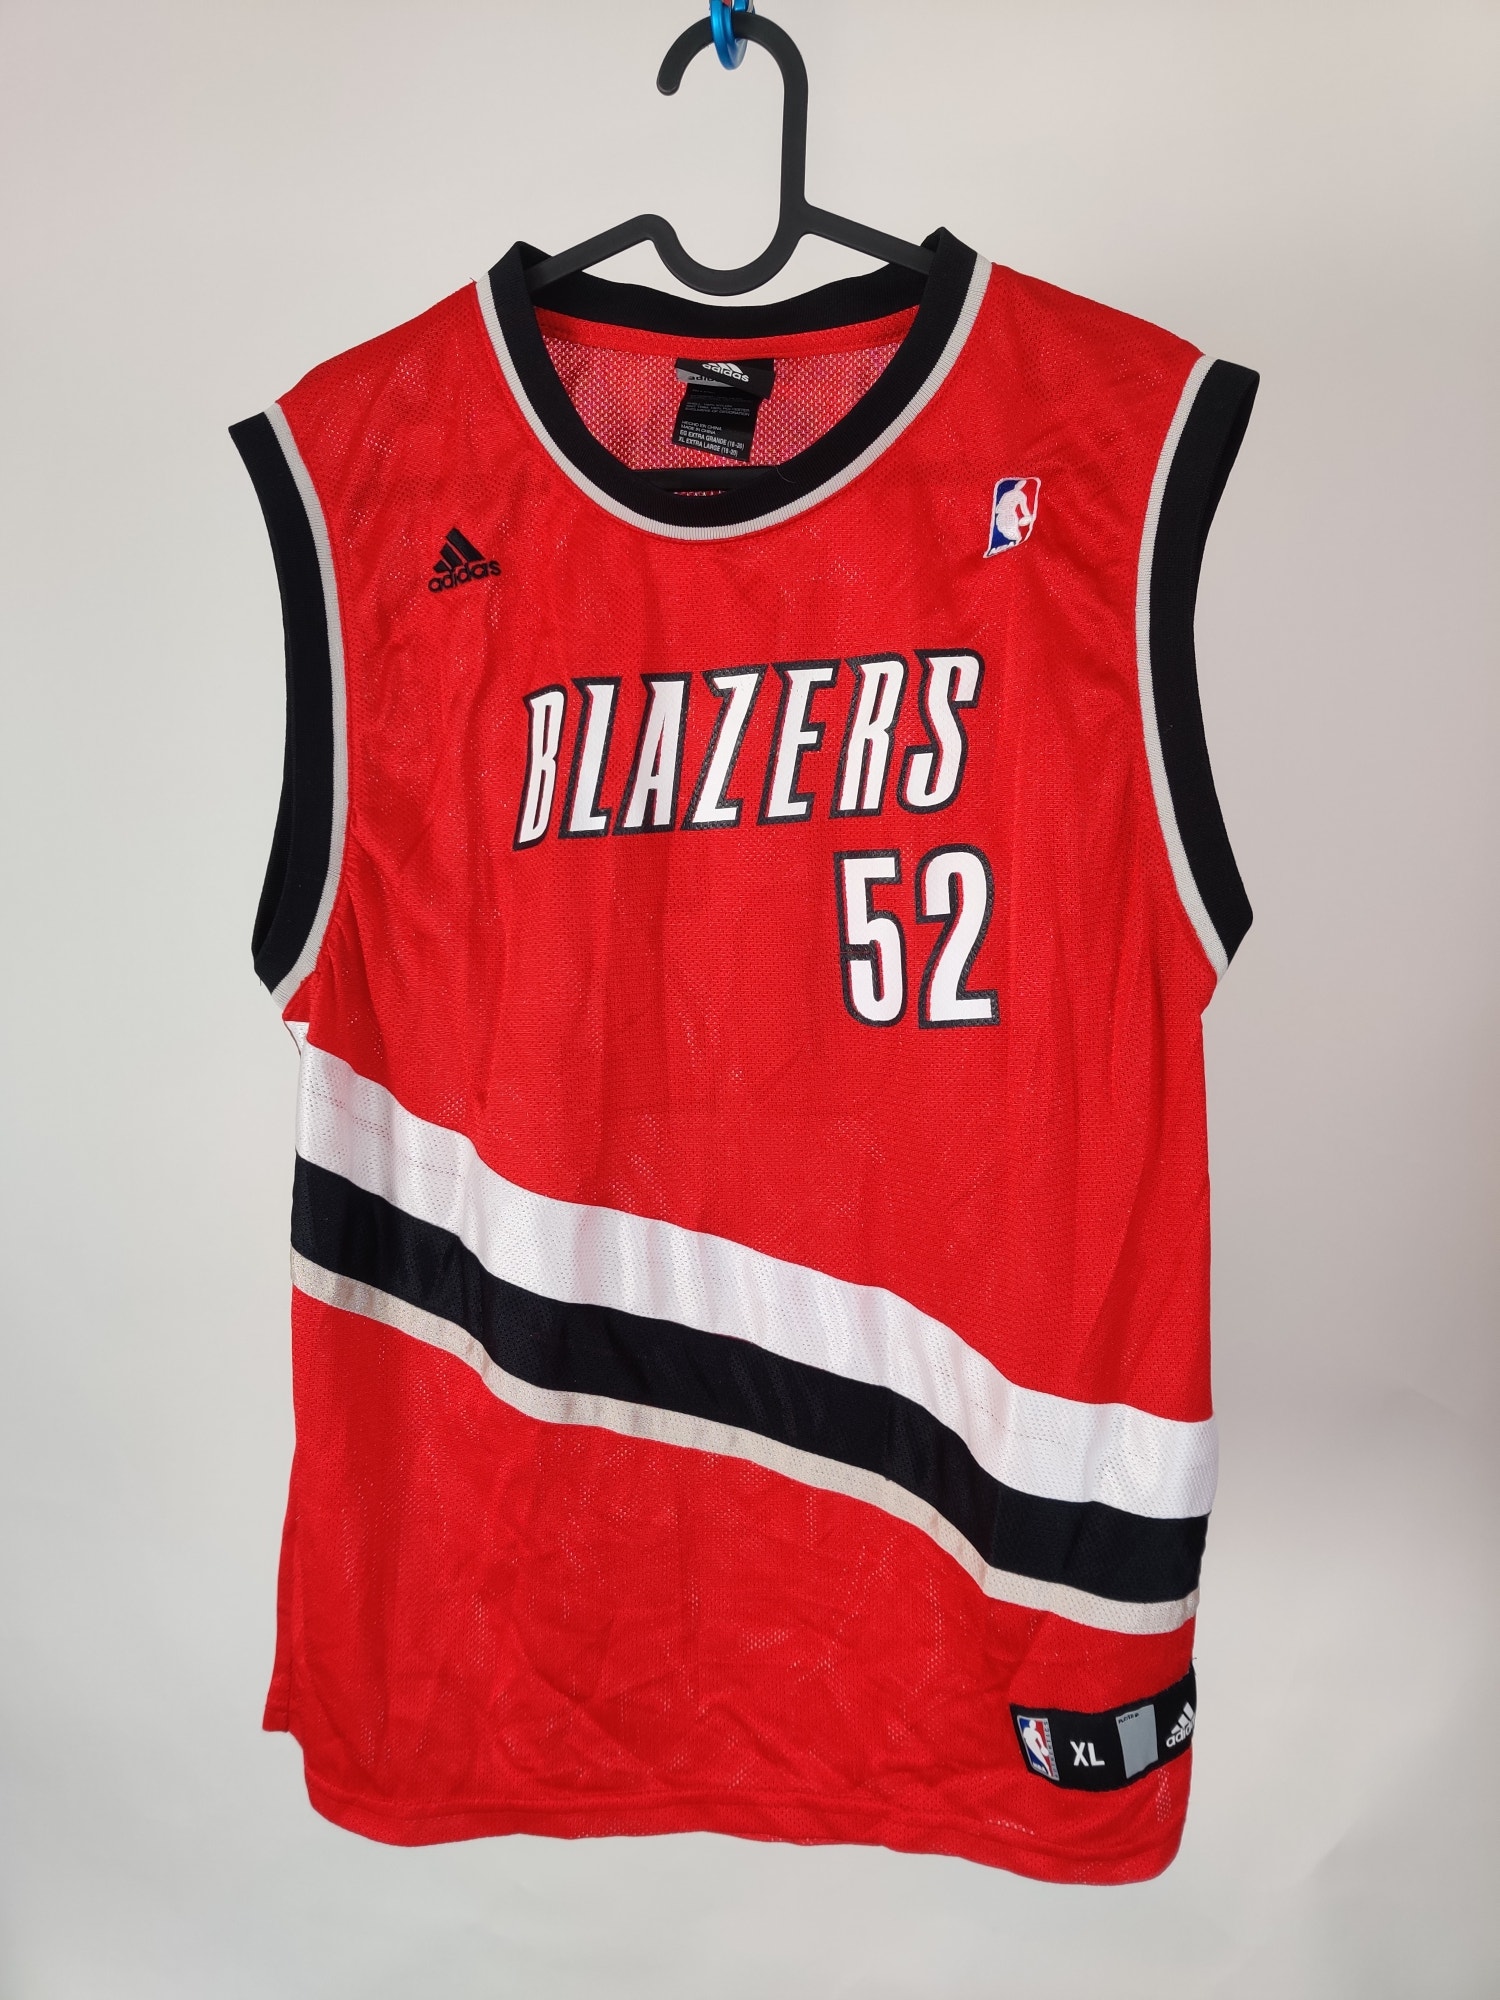 (V) Adidas NBA Portland Trail Blazers Youth jersey players Oden #52 sz XL  - Picture 3 of 11